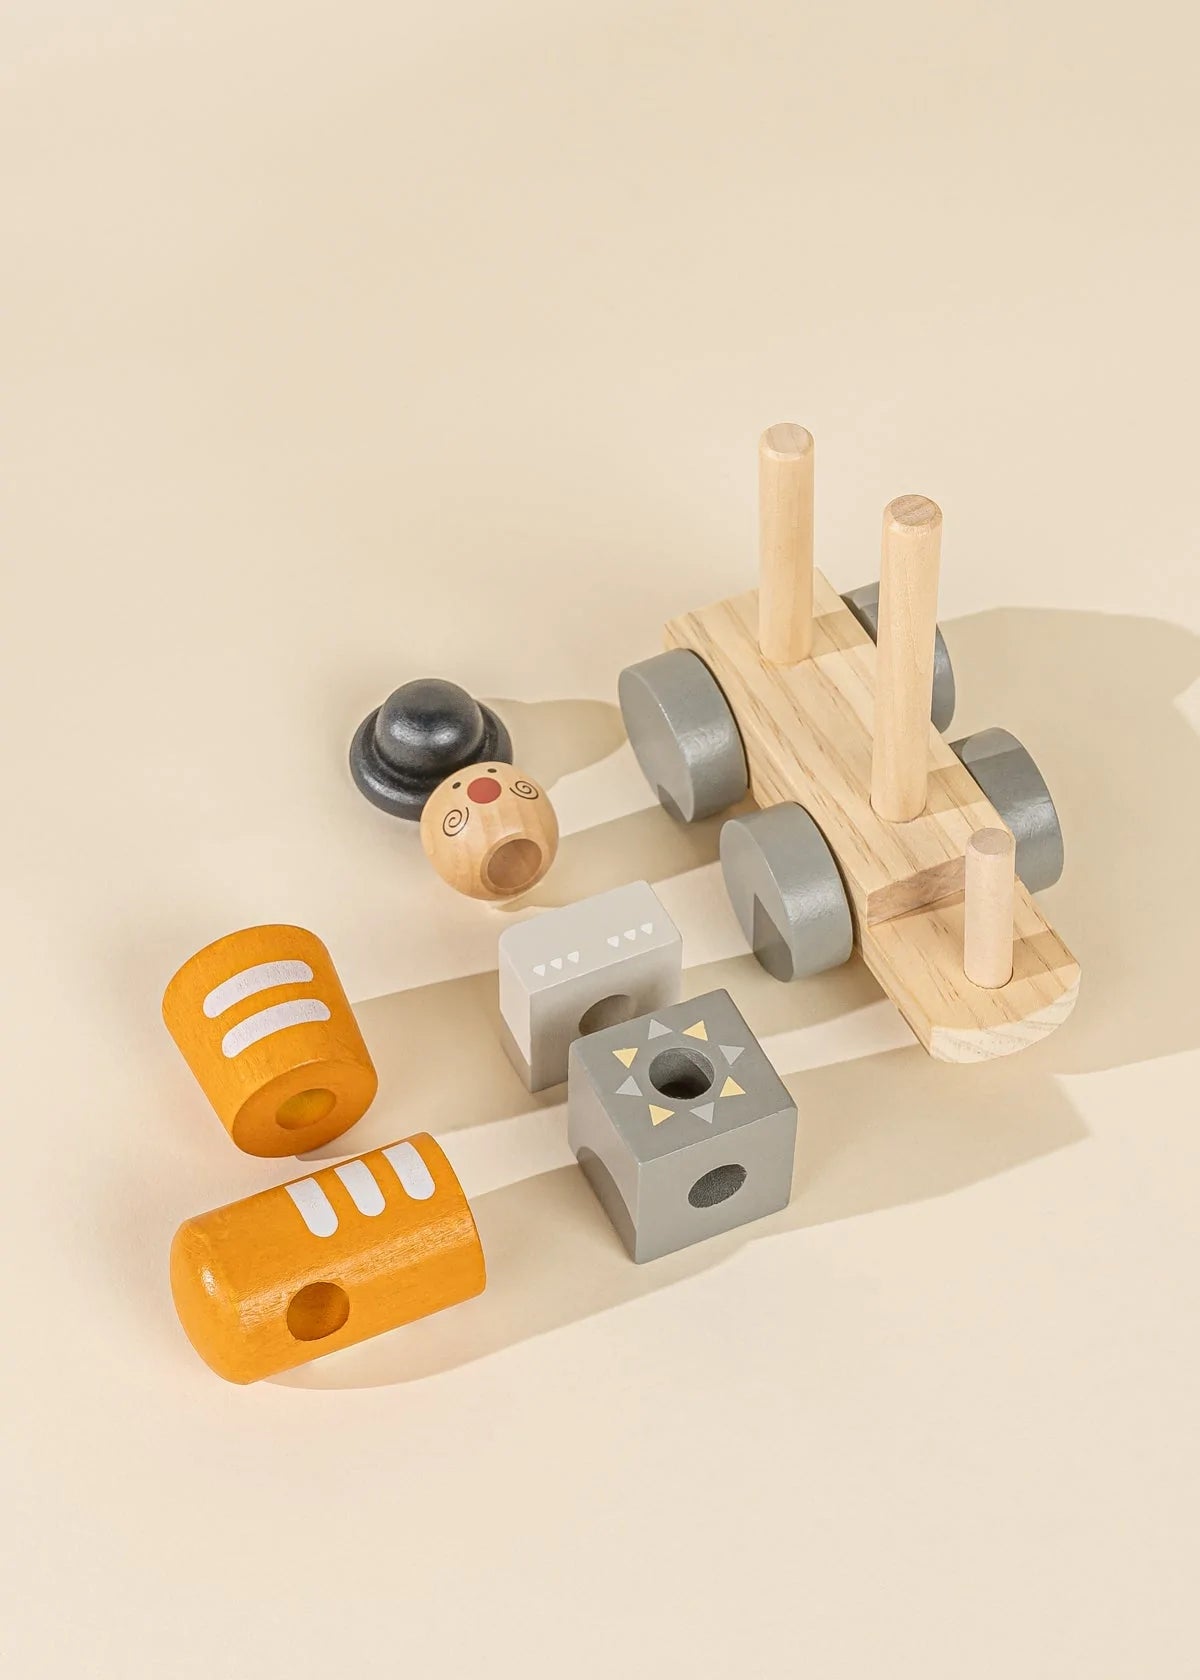 Dissembled components of wooden toy stacking train